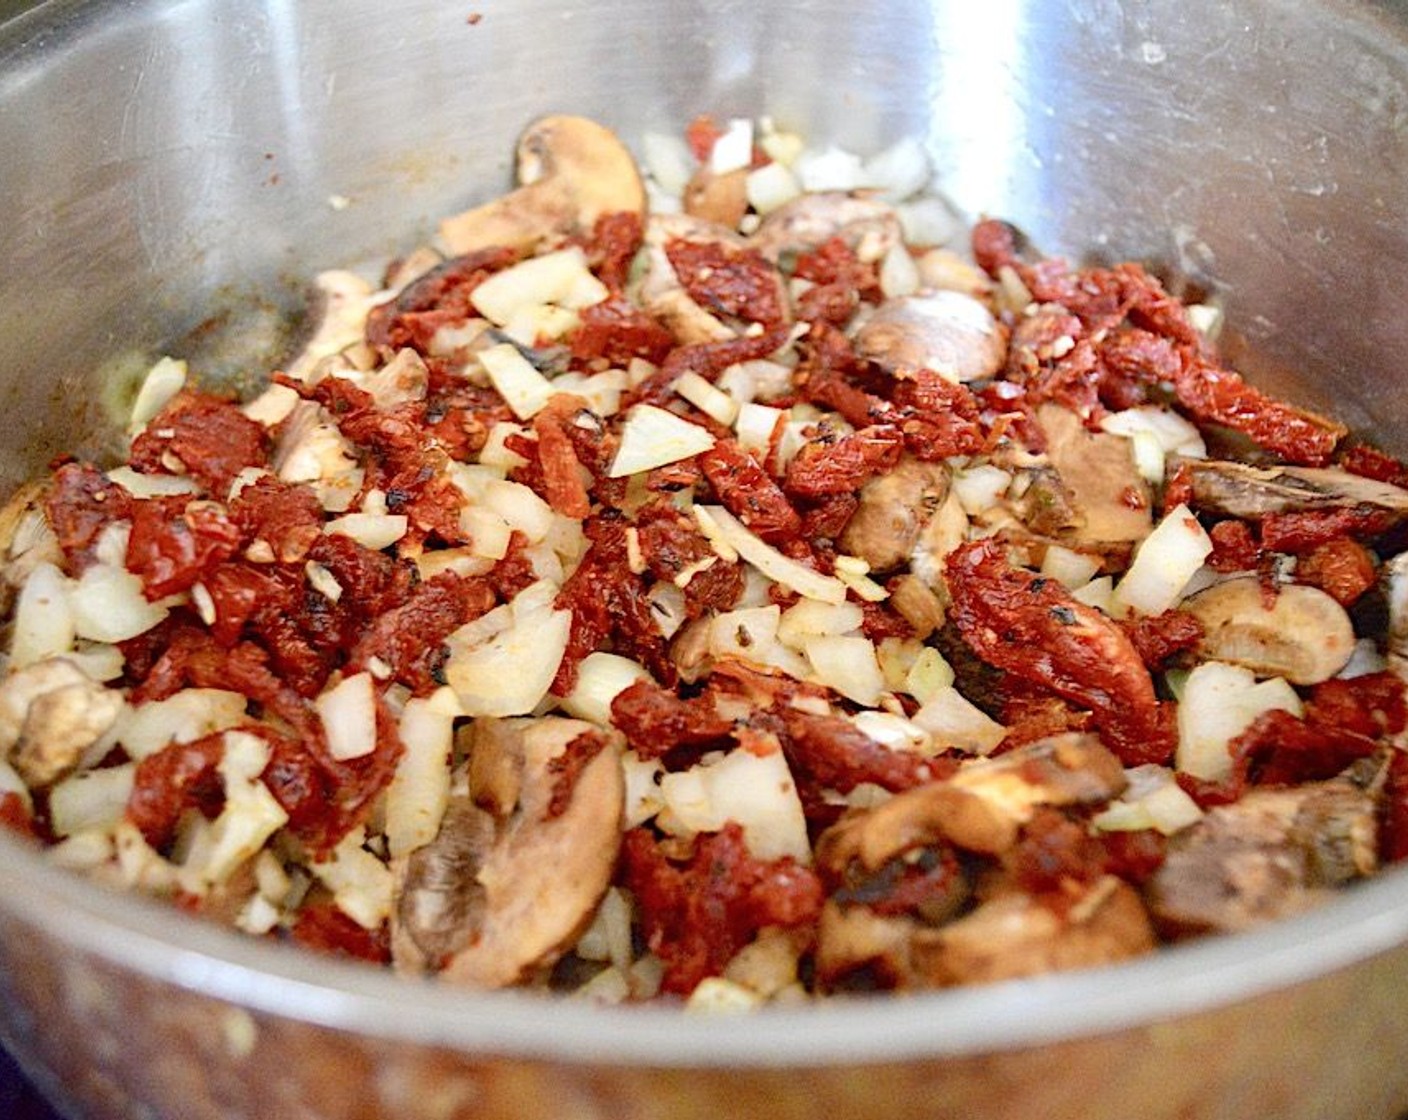 step 3 Transfer it to a plate, then add Sun-Dried Tomatoes (1 jar), Cremini Mushroom (1 cup), Onion (1), and Garlic (4 cloves) to the pan. Let them cook and get fragrant for about 3 to 4 minutes, then transfer them to the plate with the chicken.